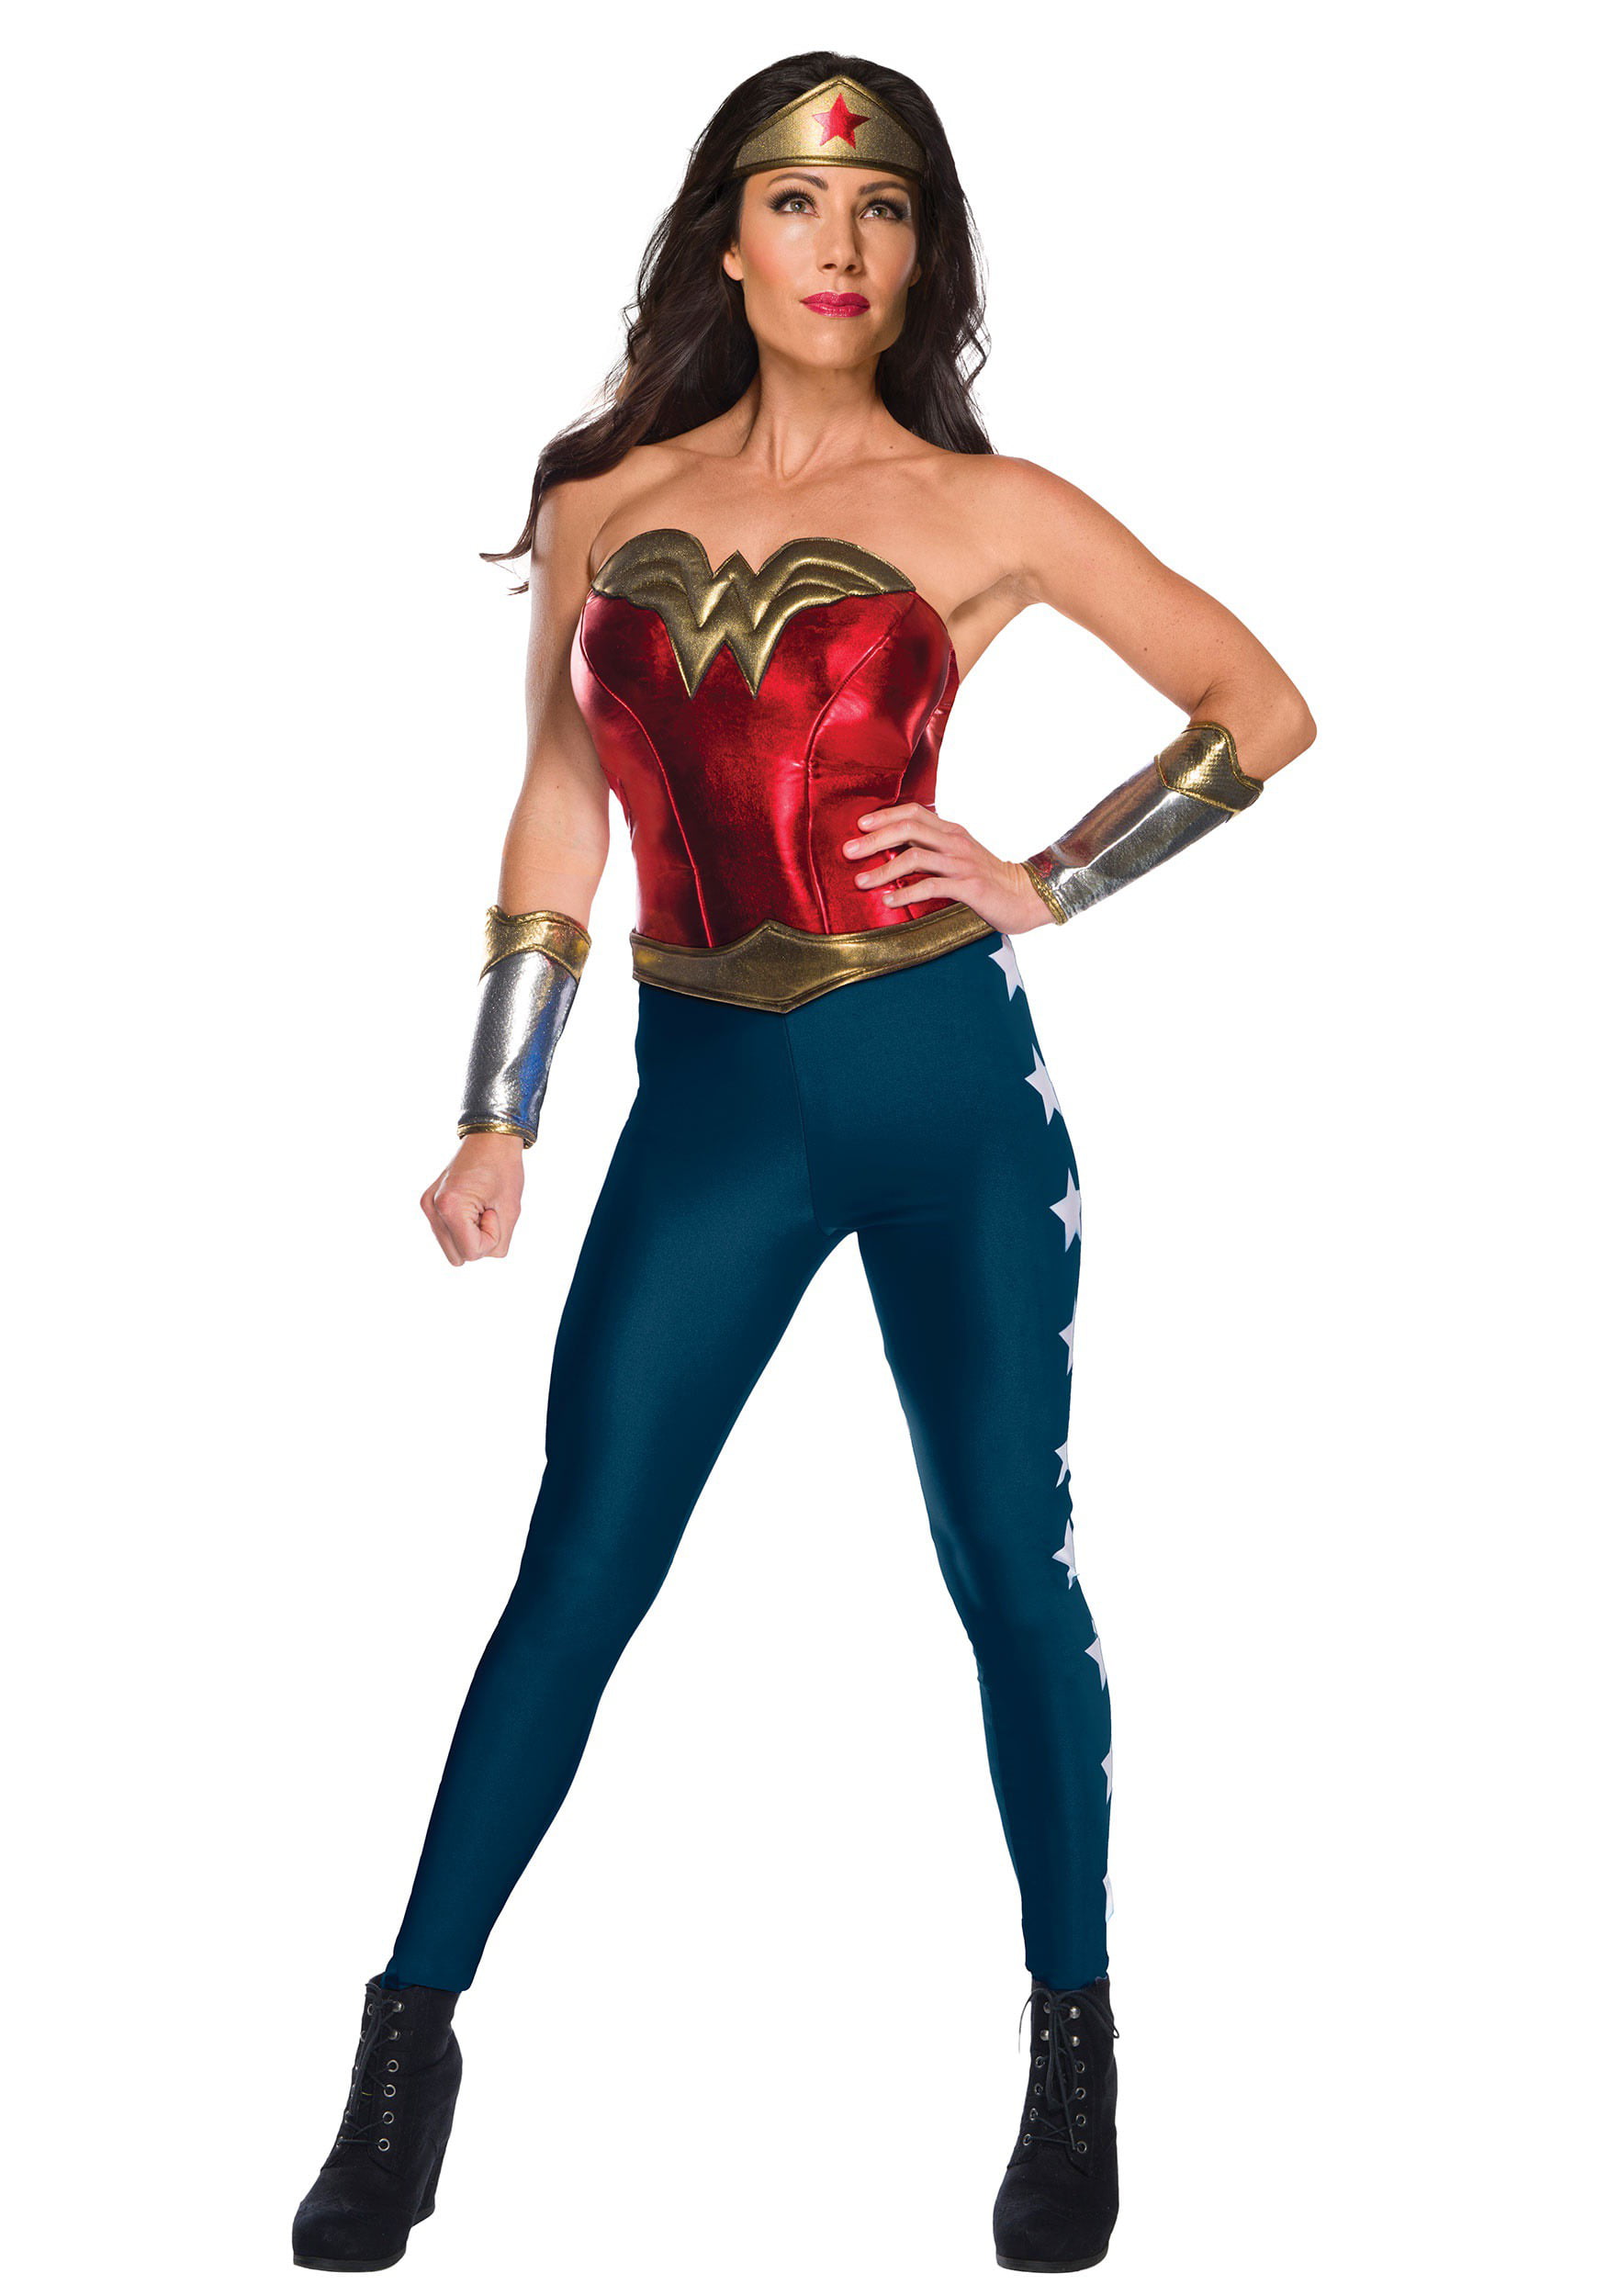 The Wonder Woman Costumes, Ranked